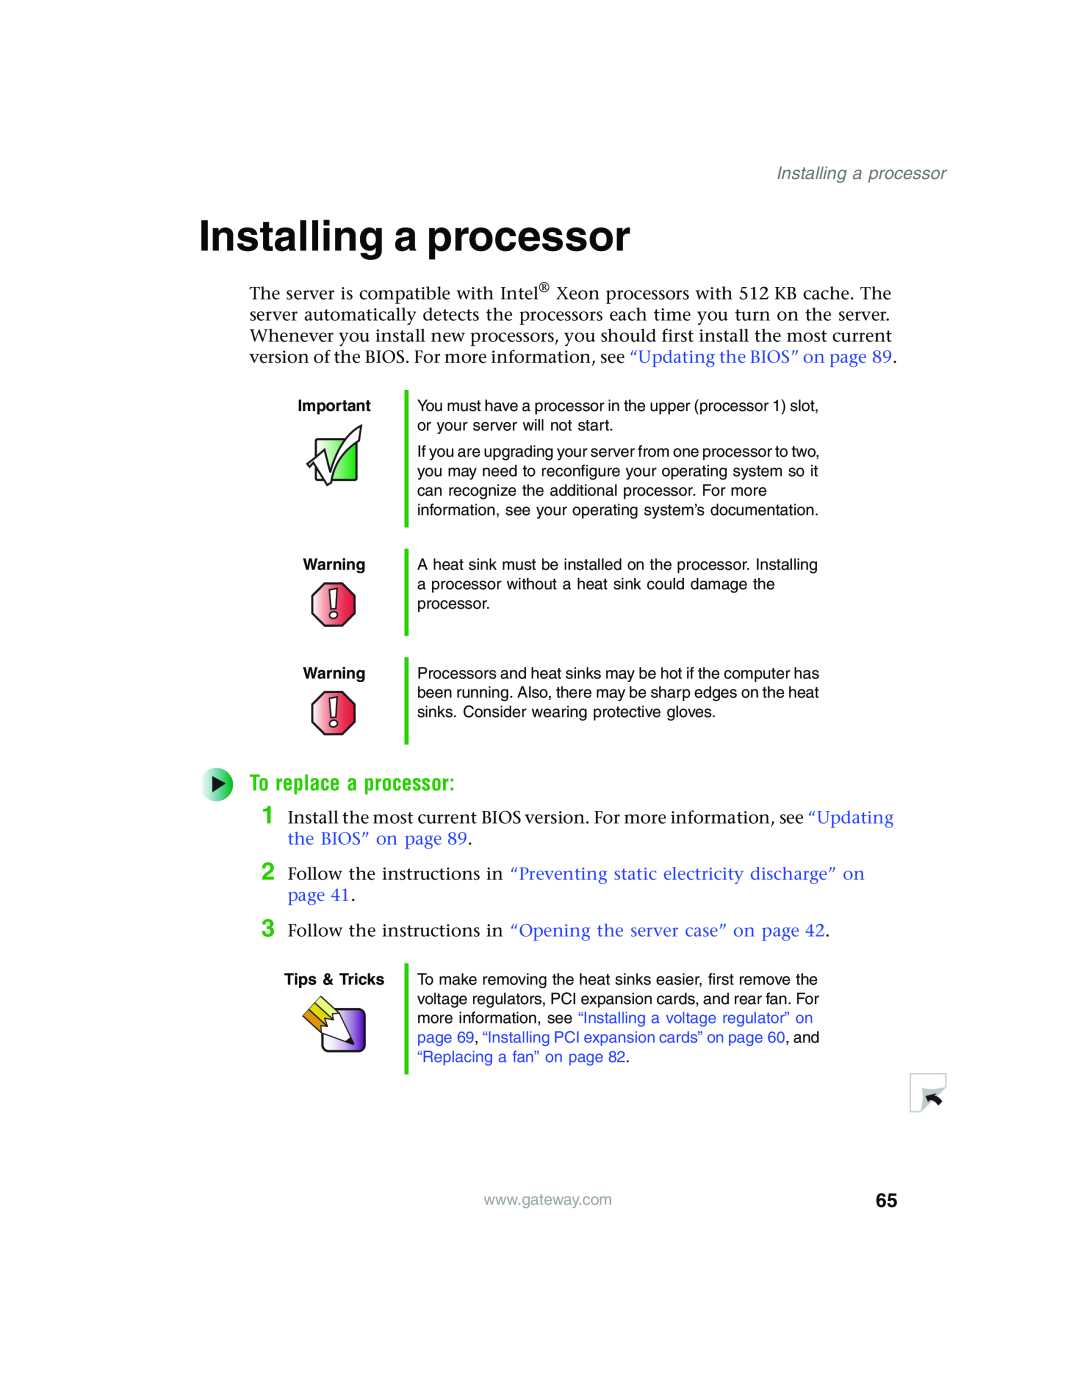 Gateway 960 Installing a processor, To replace a processor, Follow the instructions in “Opening the server case” on page 